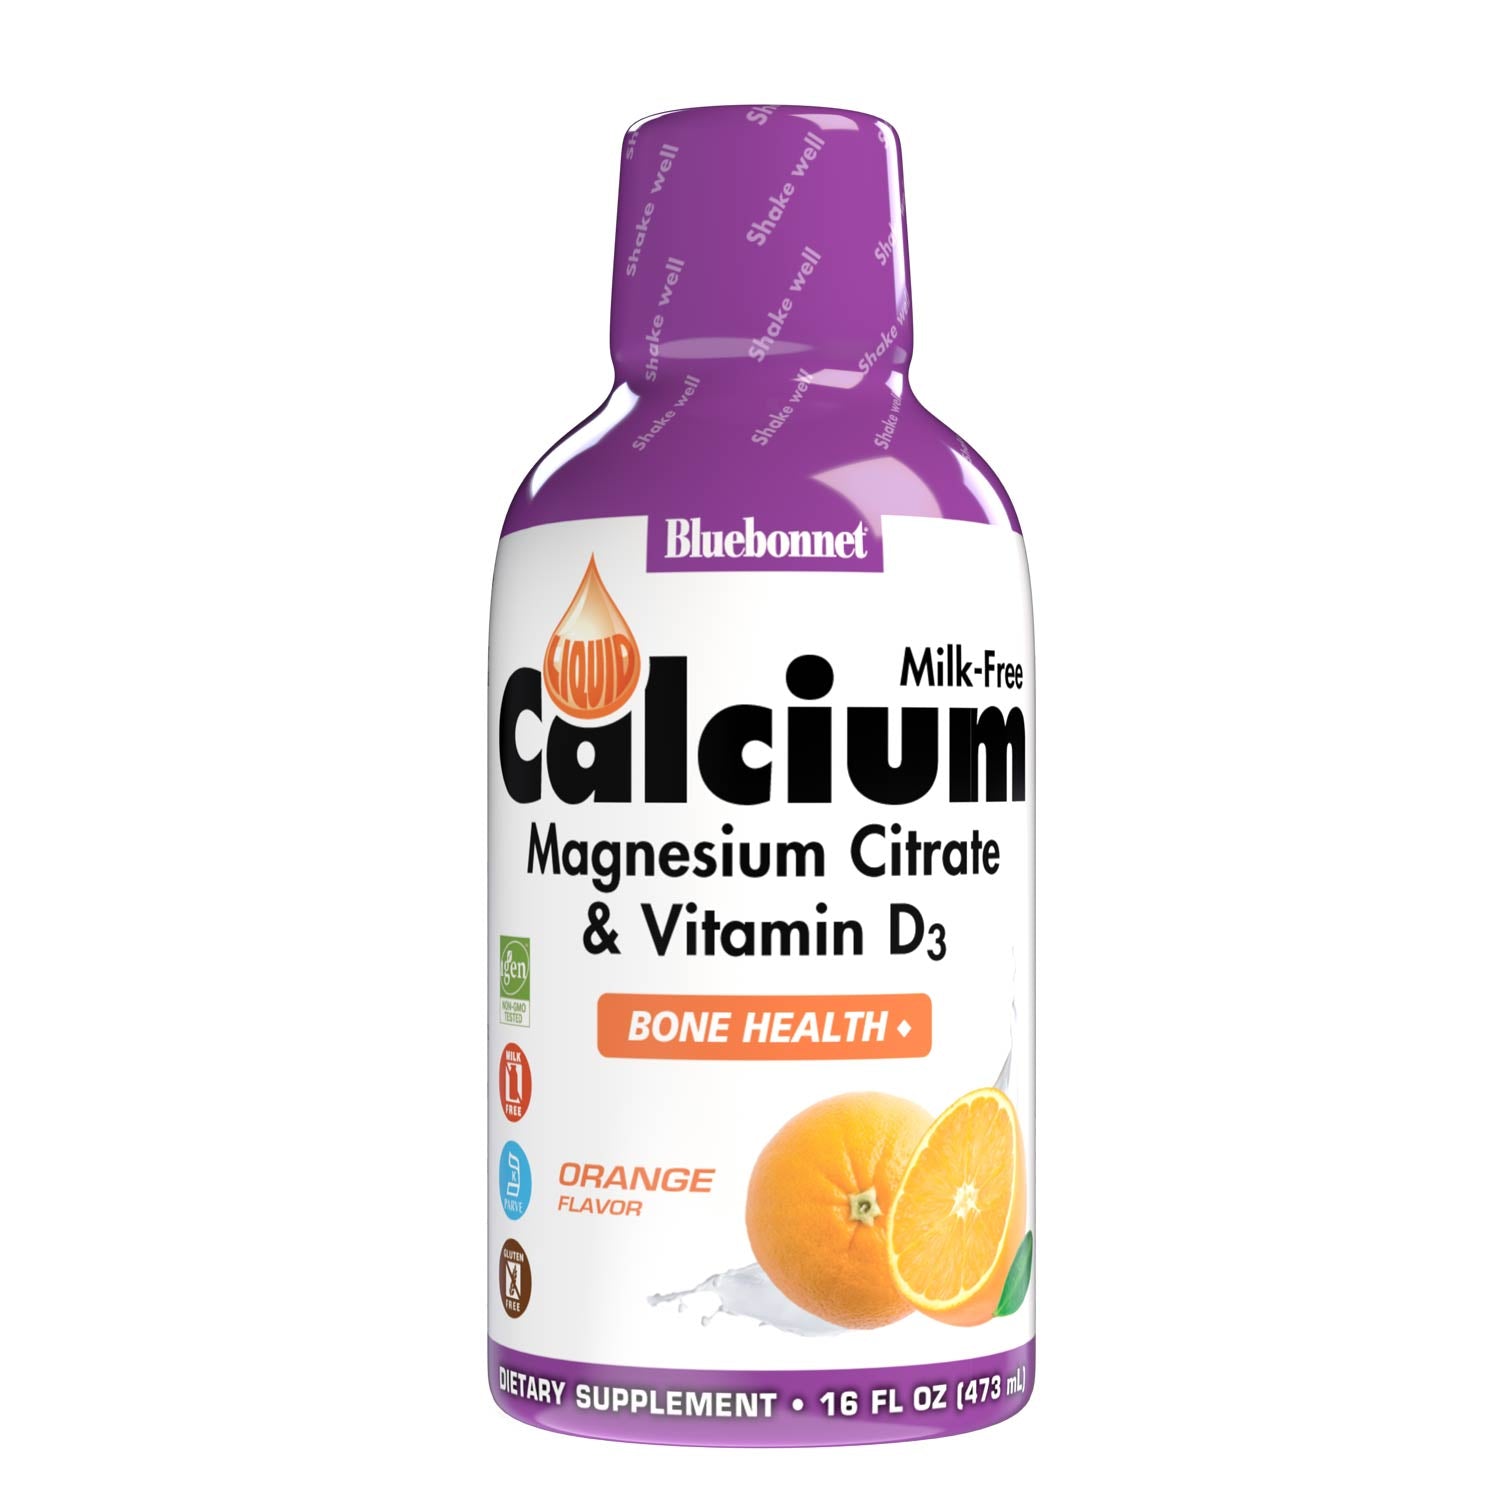 Bluebonnet's Liquid Calcium Magnesium Citrate with Vitamin D3 are formulated with calcium in a chelate of calcium citrate, as well as magnesium in a chelate of magnesium citrate and magnesium aspartate in a delicious orange flavor. Plus, this formula are formulated with vitamin D3 (cholecalciferol) from lanolin for strong healthy bones. #flavor_orange